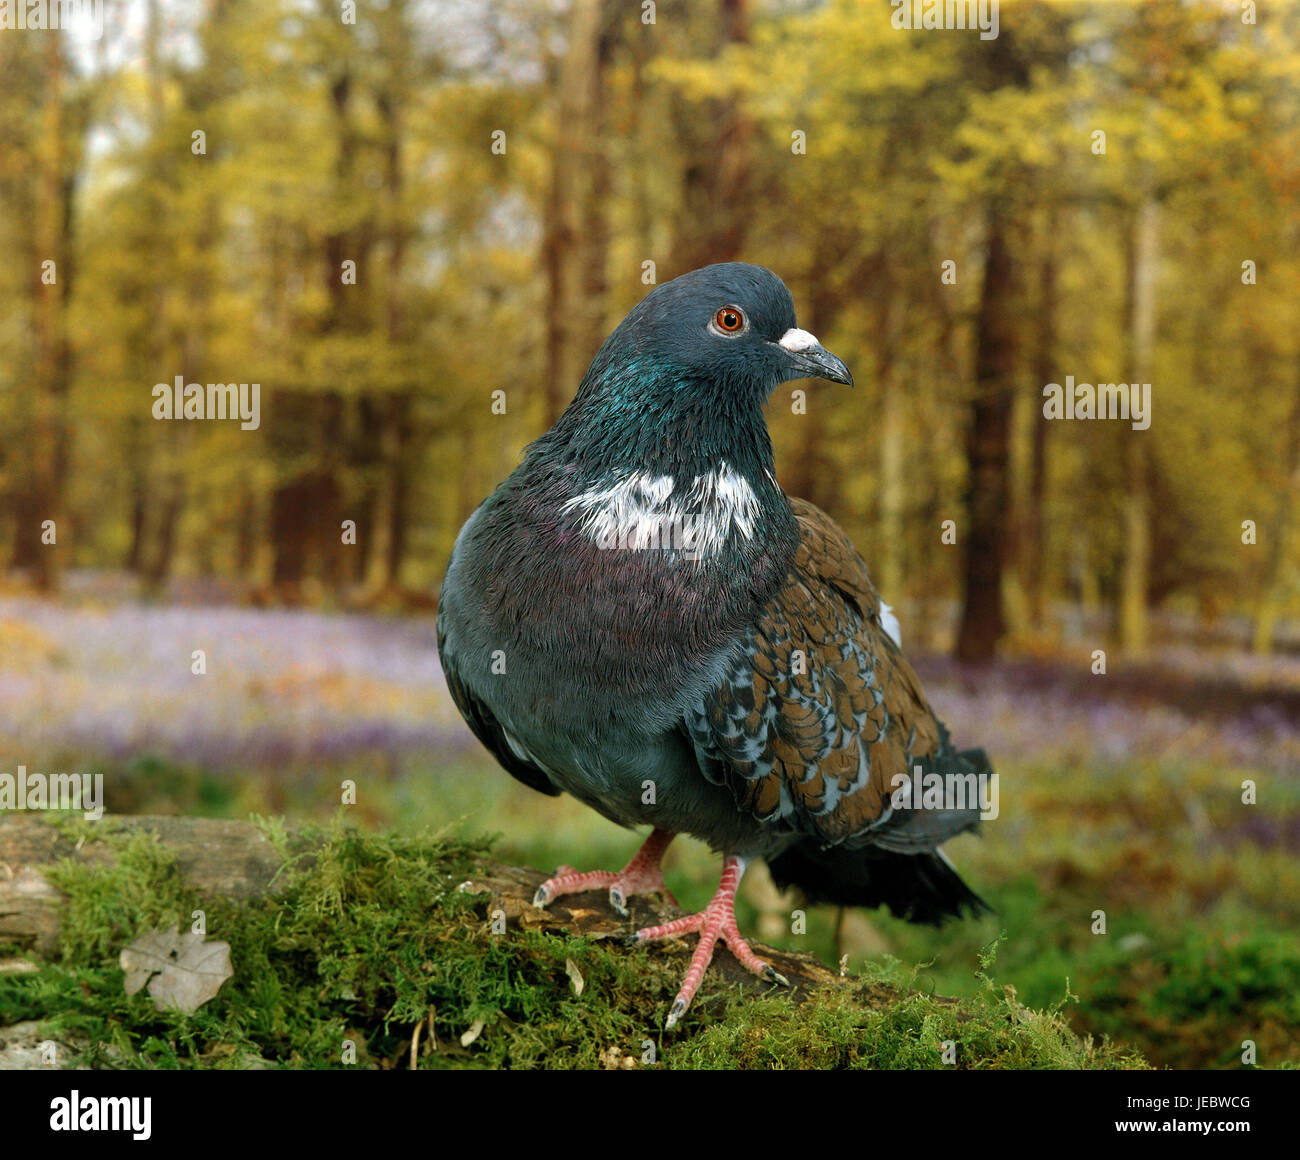 House pigeon stands on mossy subsoil, Stock Photo